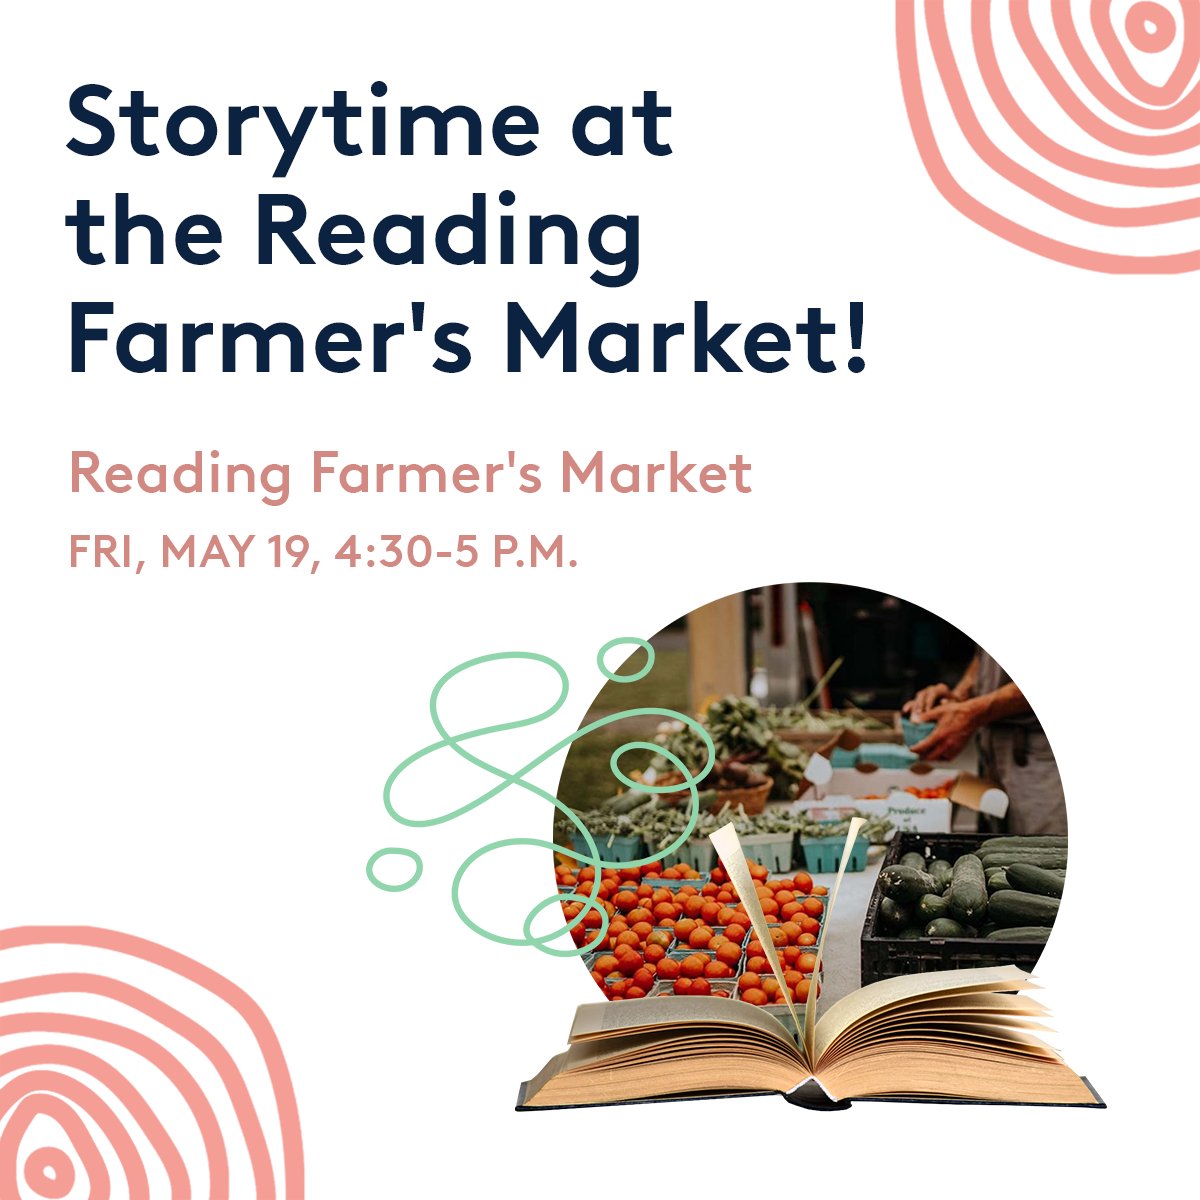 Bring the entire family to enjoy books, songs, and activities, while building literacy skills and checking out the wonderful Reading Farmers Market! More info --> cinlib.org/432s5uA